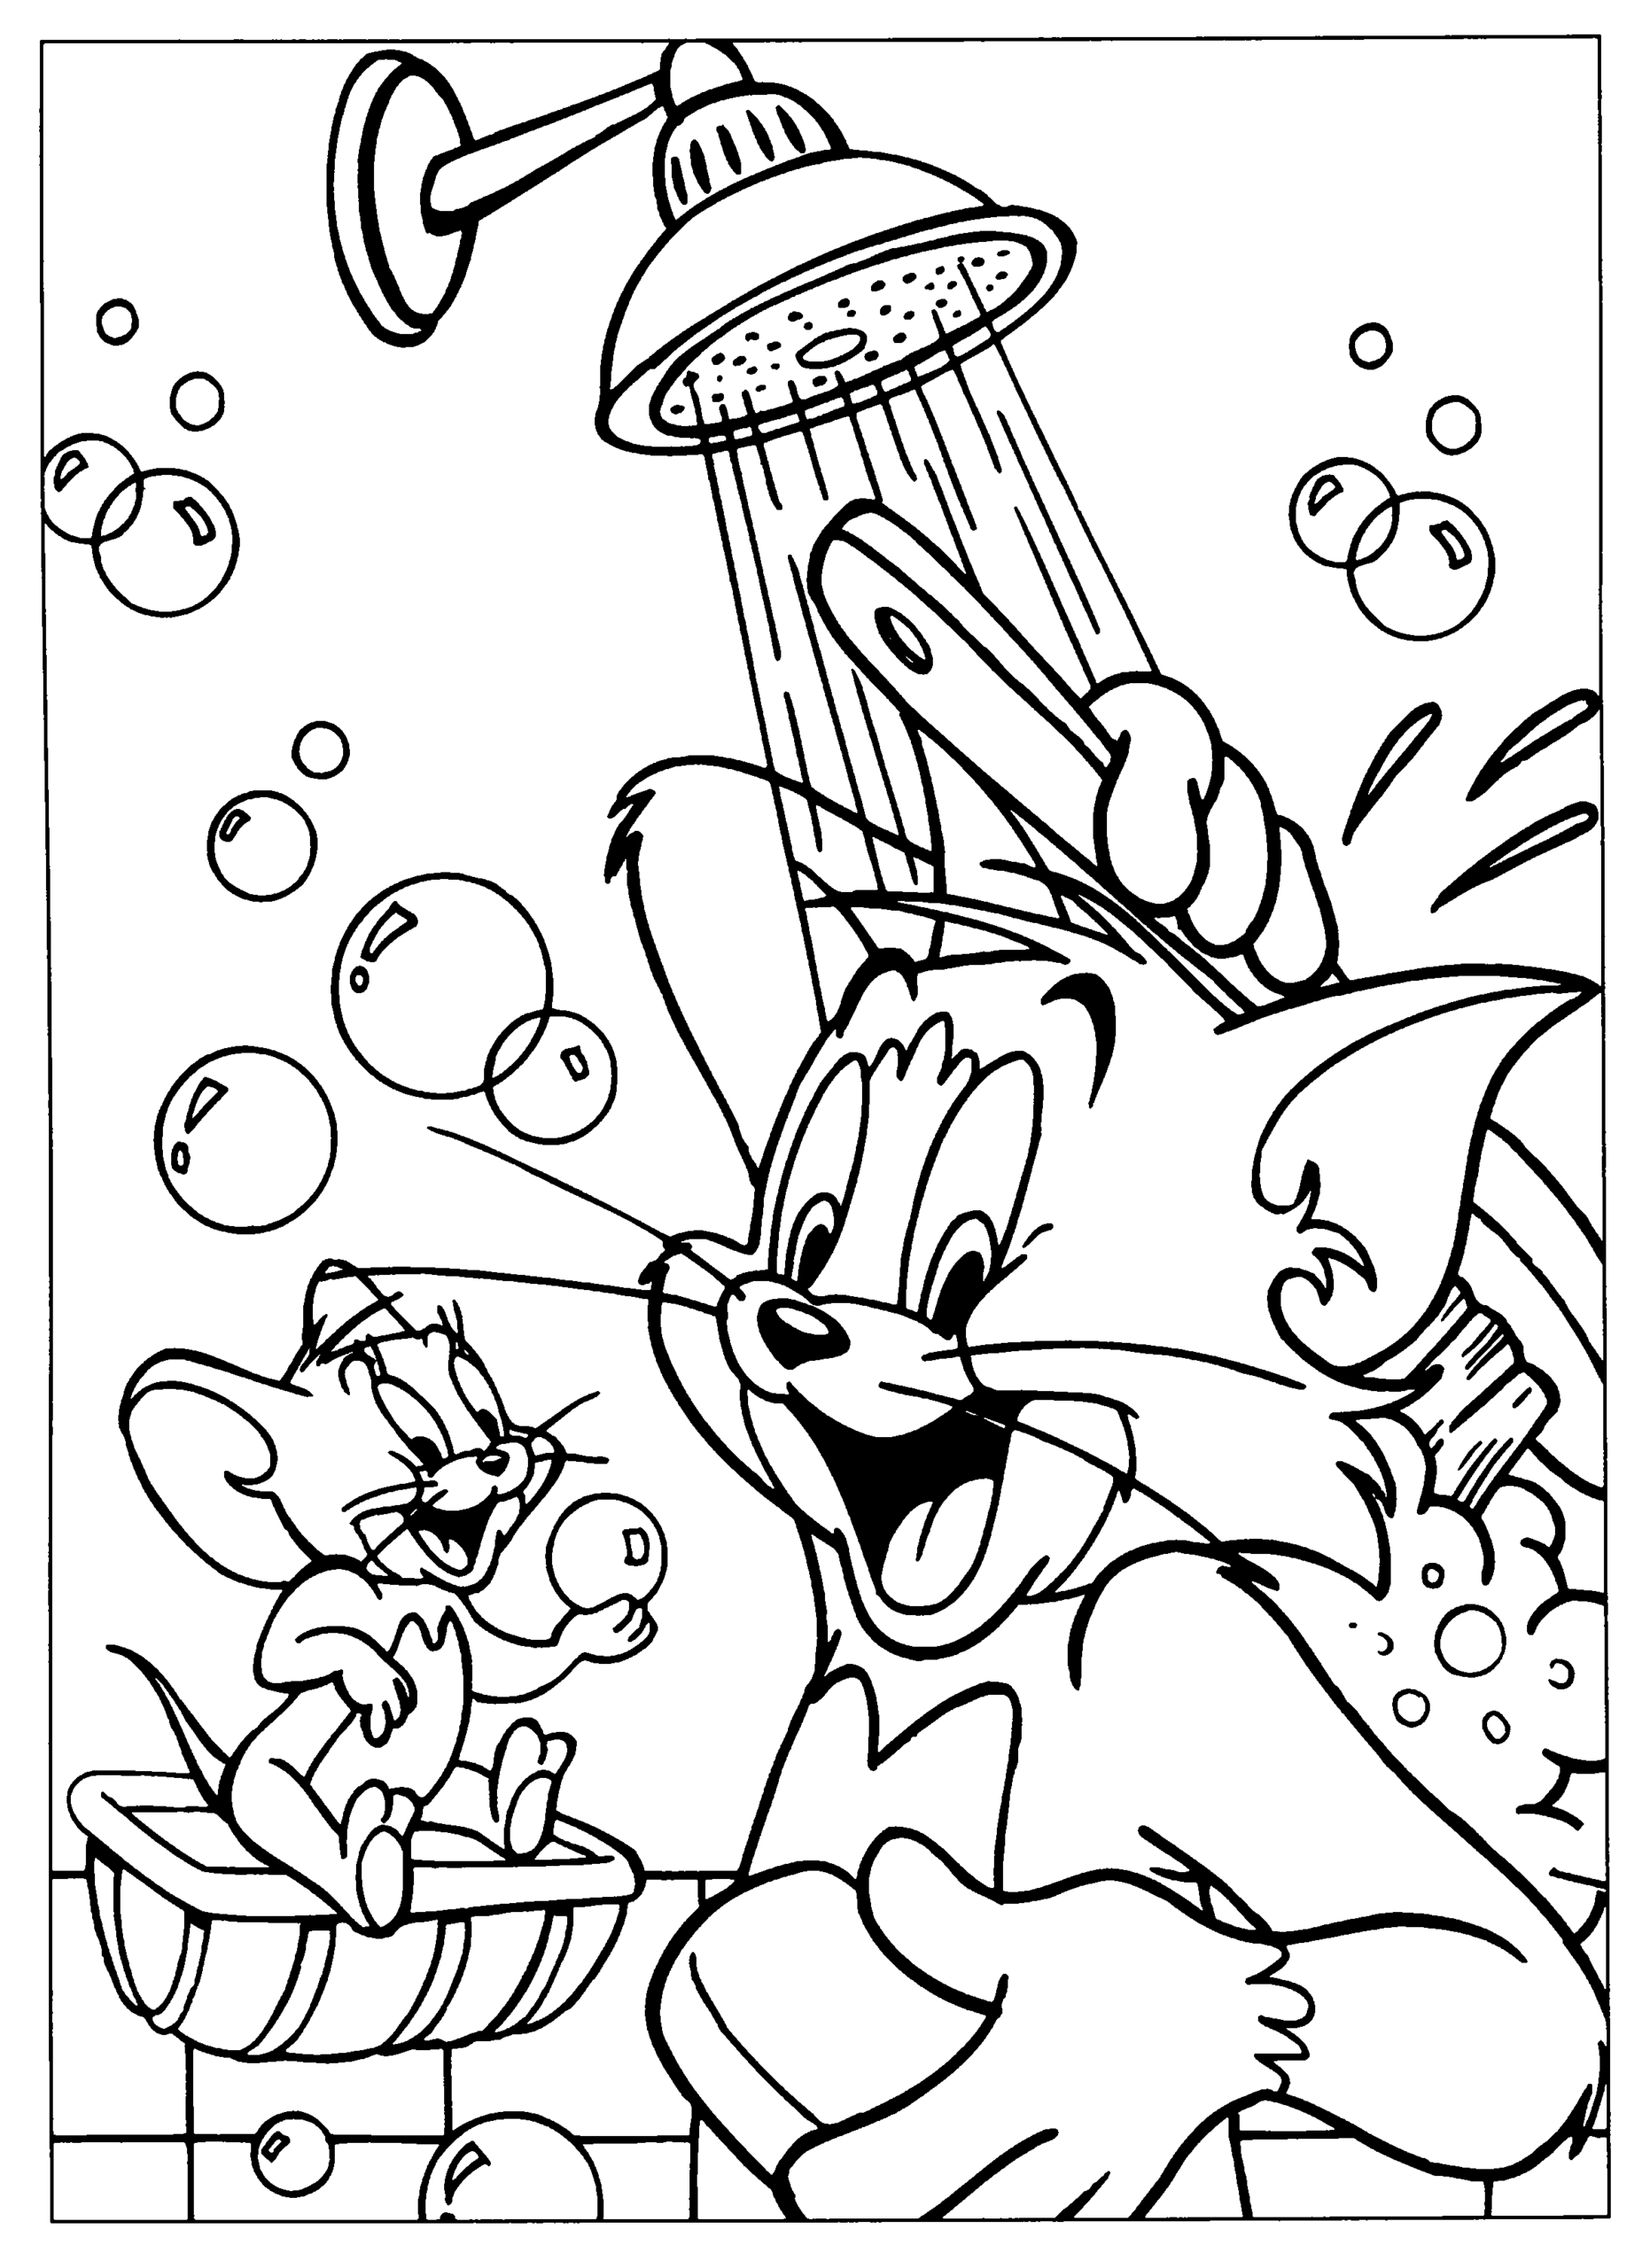 Tom and Jerry Coloring Pages TV Film for kids Printable 2020 10096 Coloring4free